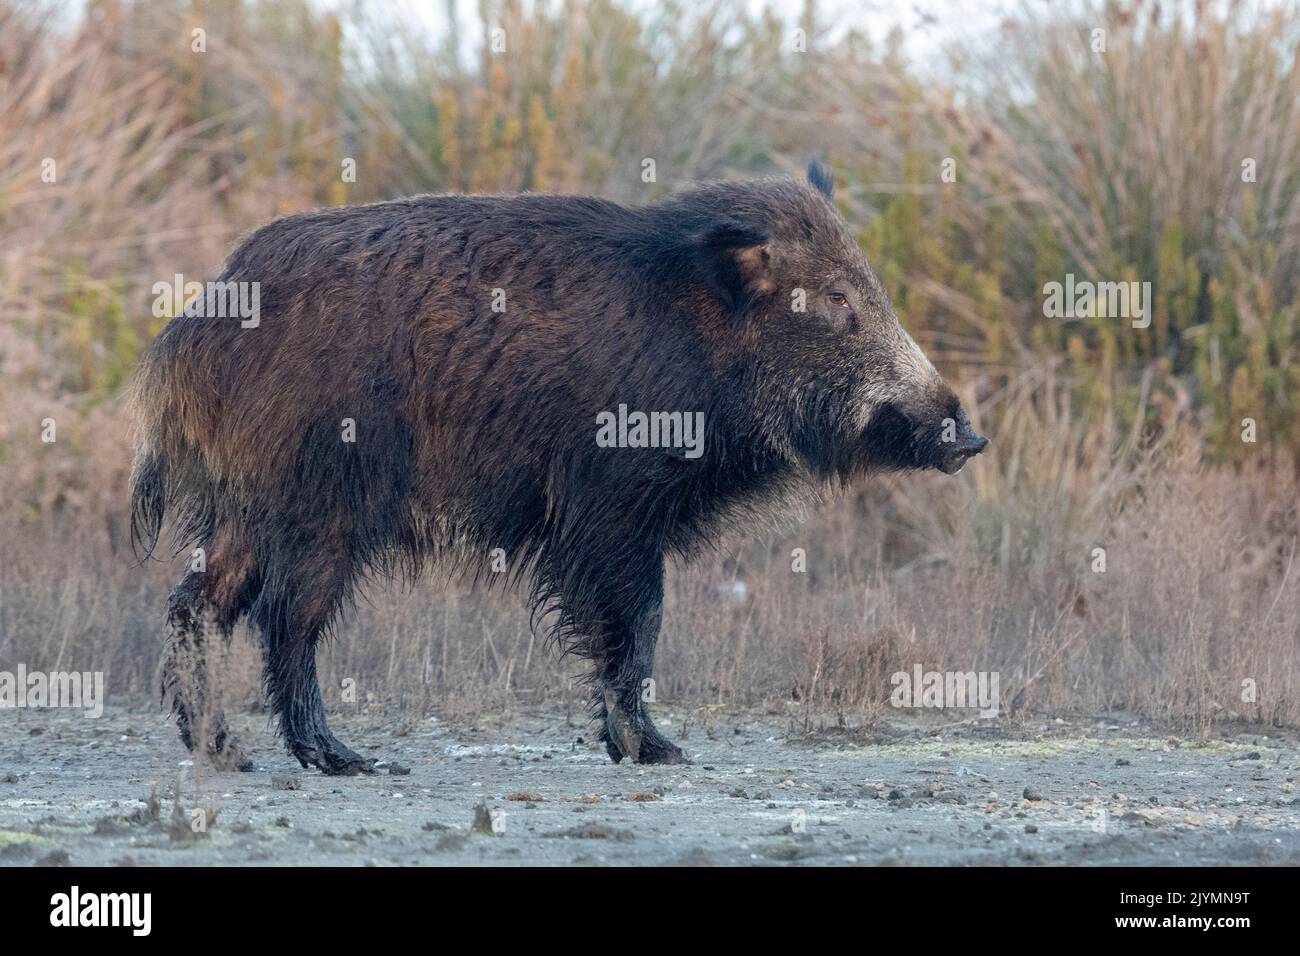 Wild Boar (Sus scrofa), side view of an adult standing on the ground, Lazio, Italy Stock Photo